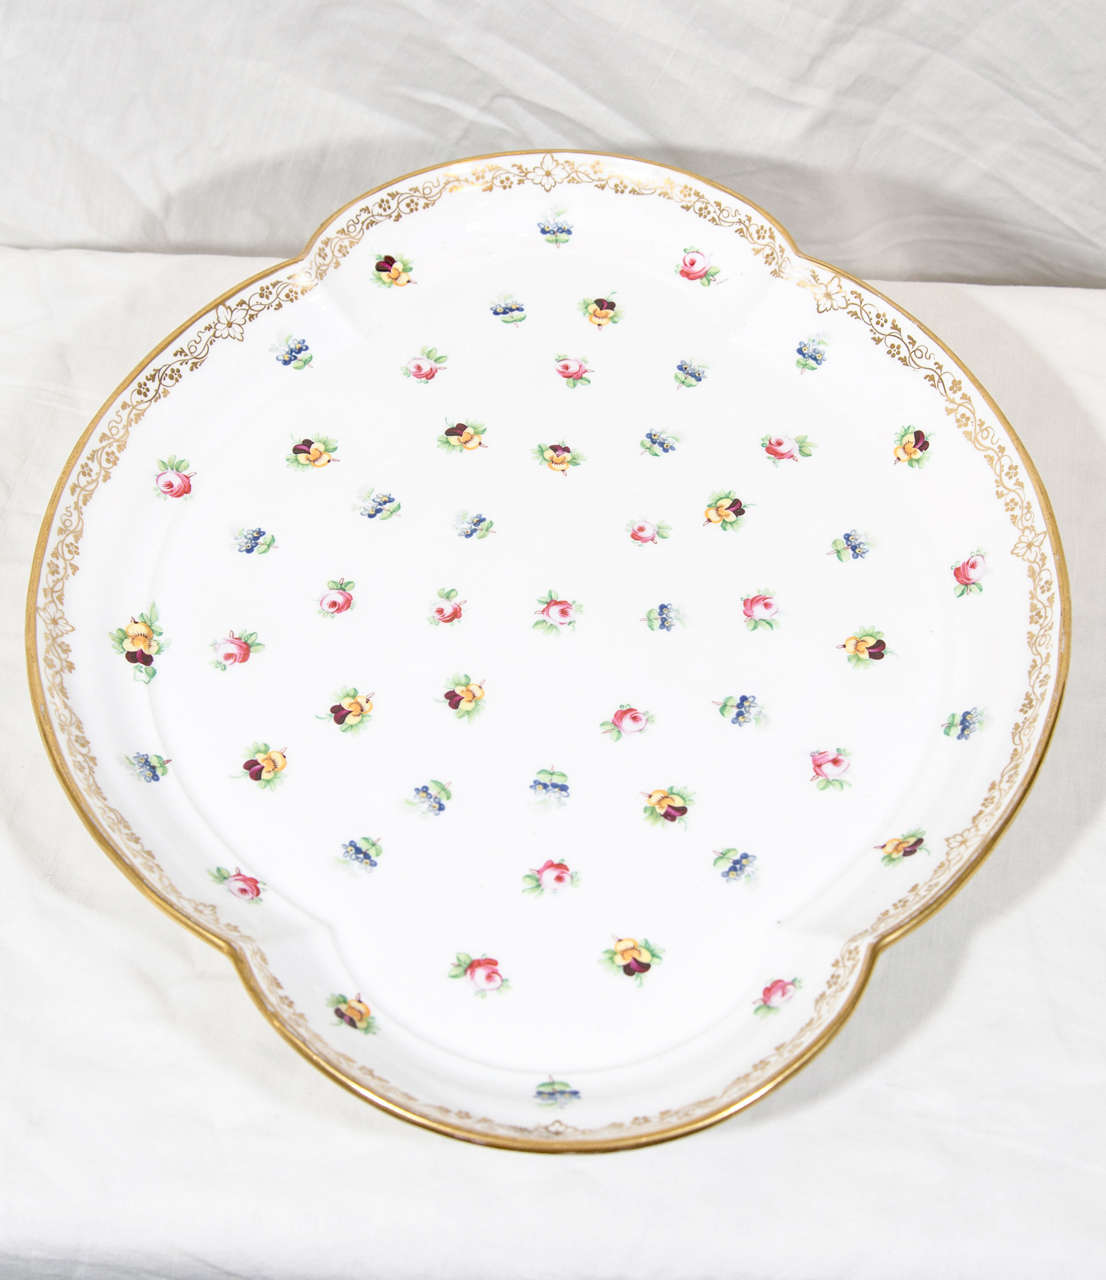 English Antique Porcelain Serving Tray Decorated with Pink Roses and Pansies